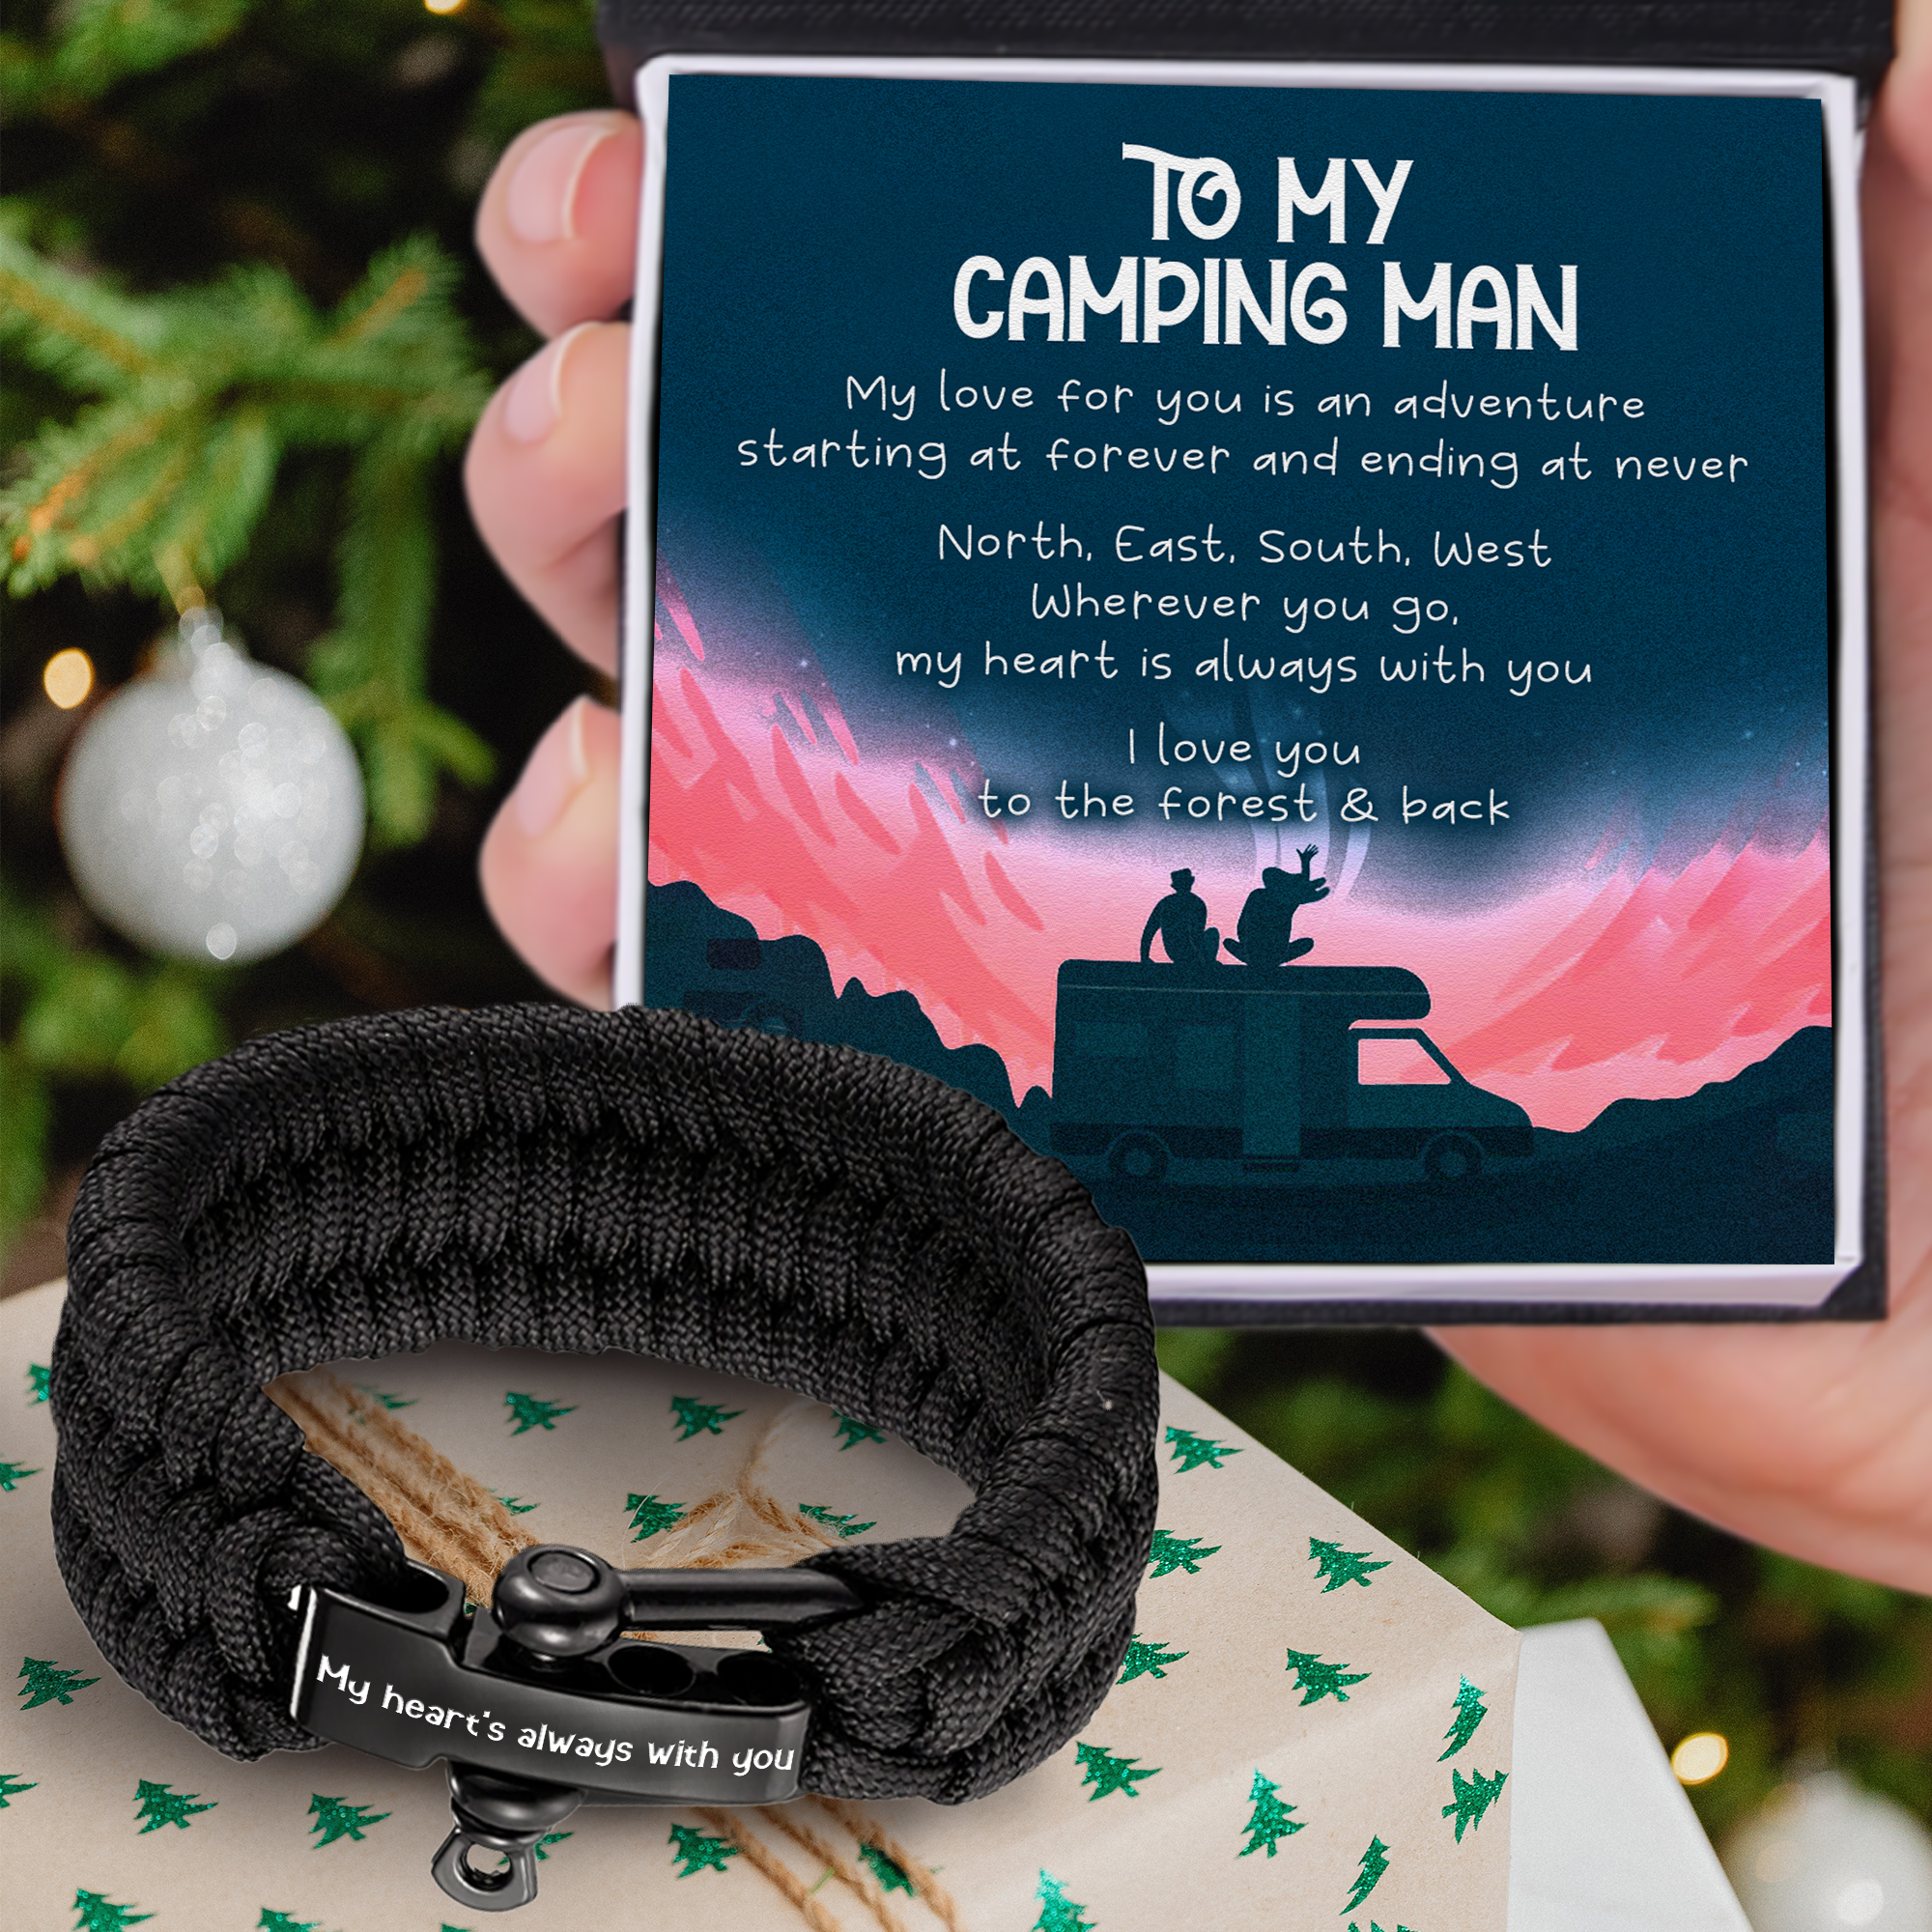 Paracord Rope Bracelet - Camping - To My Man - I Love You To The Forest & Back - Ukgbxa26015